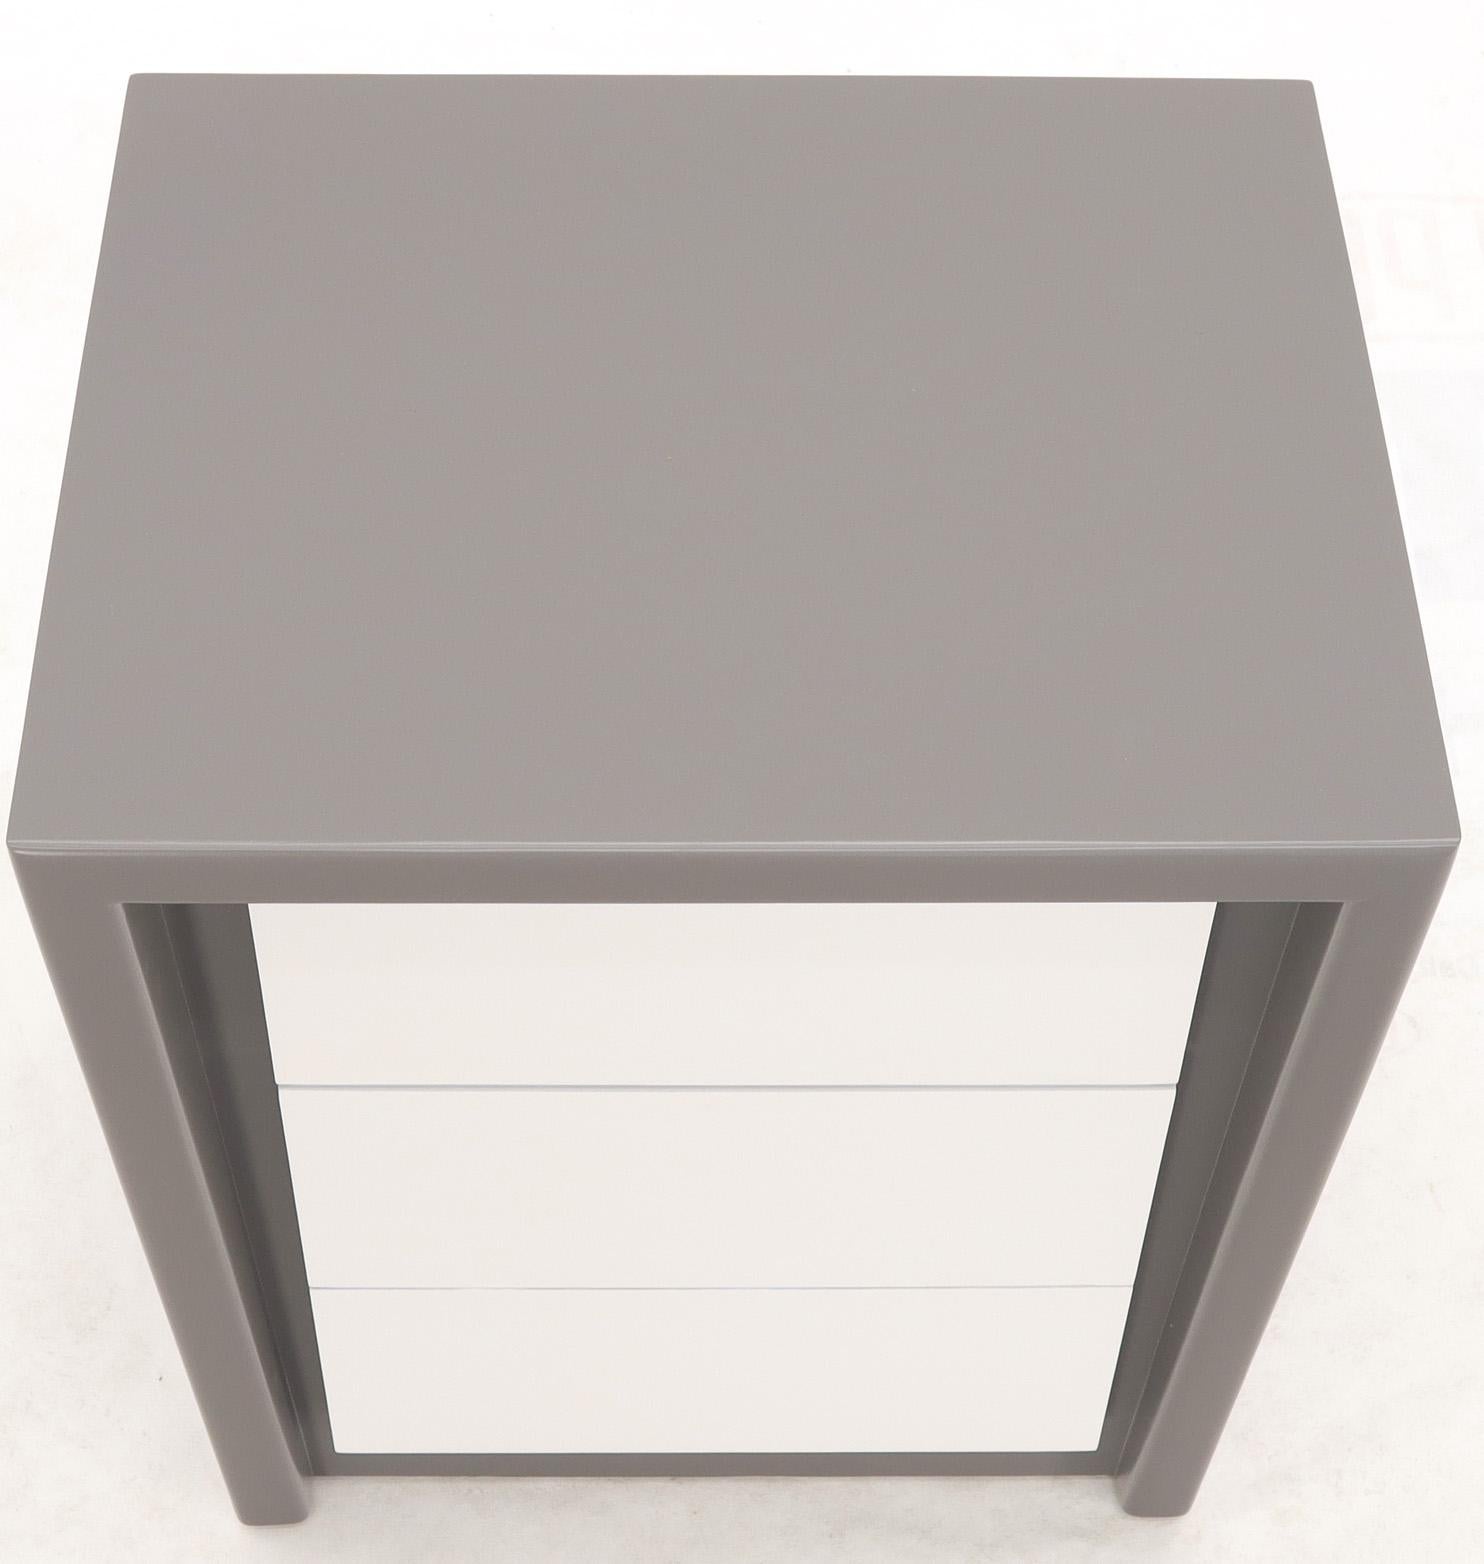 Mahogany Pair of Tapered Shape Two Drawers Grey and White End Side Tables Nightstands For Sale